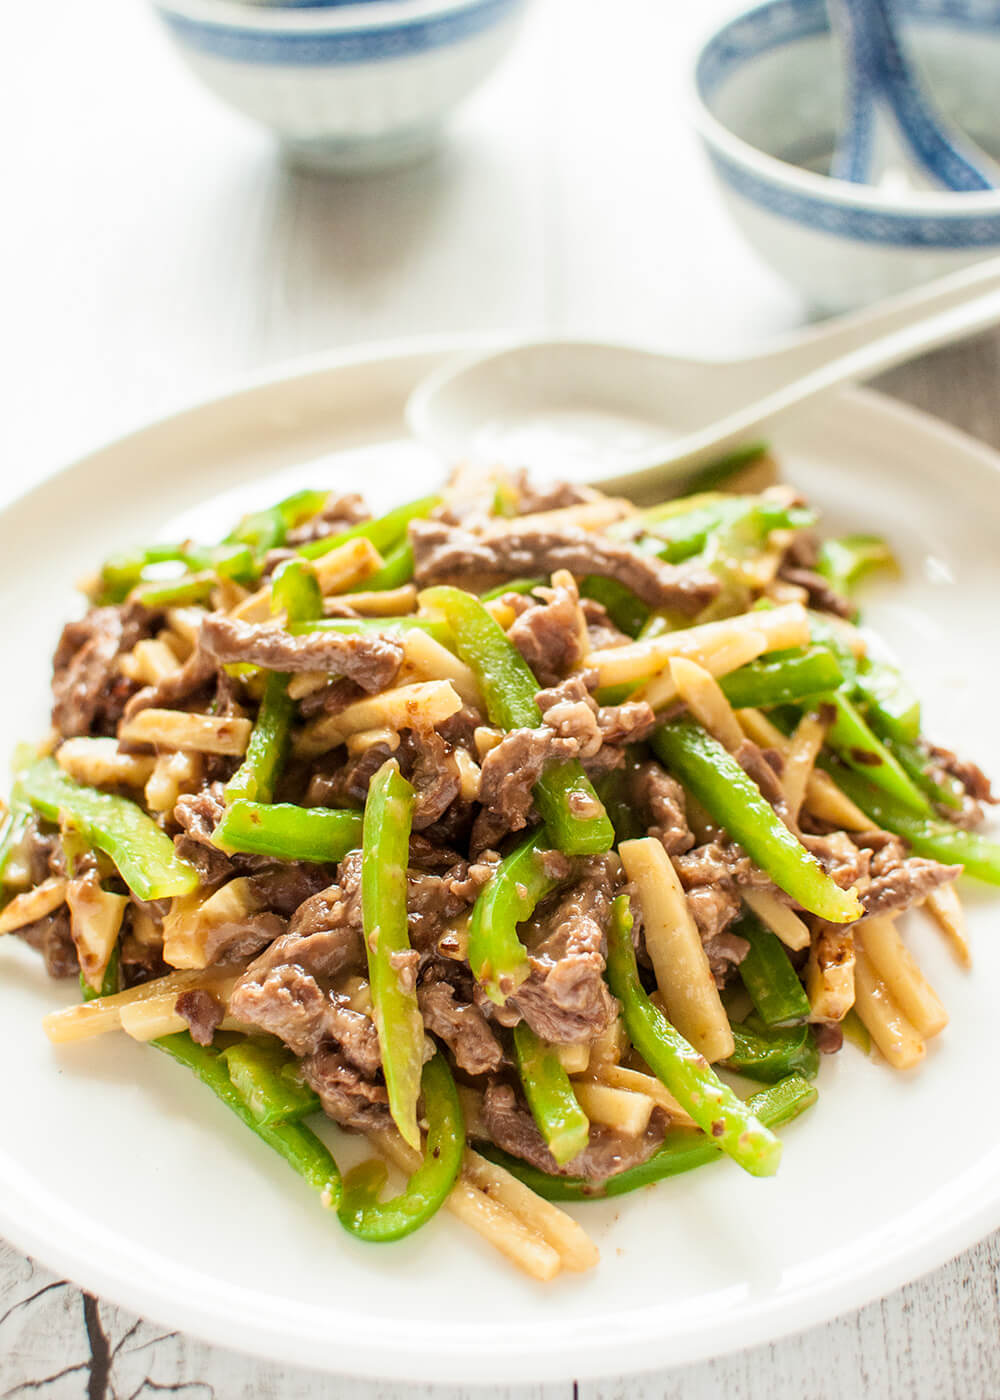 This is a quick stir fry dish that originated in China. Beef, green pepper (capsicum) and bamboo shoots are cut into thin strips and cooked in soy flavoured sauce with a touch of oyster sauce.